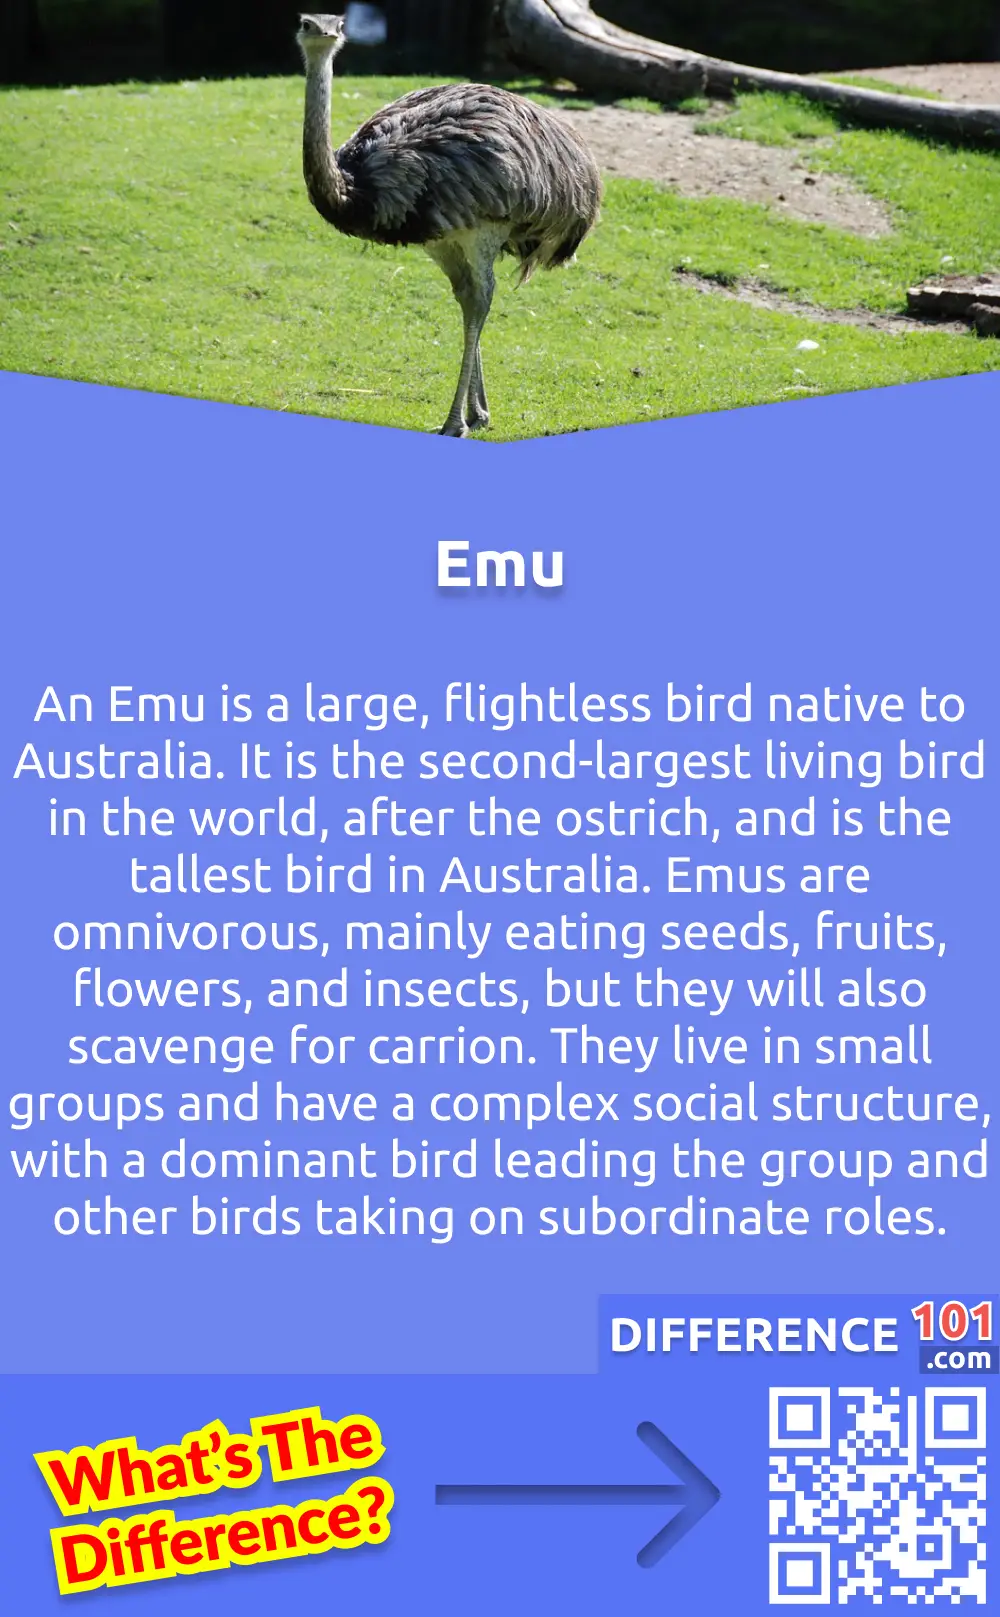 What Is Emu? An Emu is a large, flightless bird native to Australia. It is the second-largest living bird in the world, after the ostrich, and is the tallest bird in Australia. Emus are omnivorous, mainly eating seeds, fruits, flowers, and insects, but they will also scavenge for carrion. They live in small groups and have a complex social structure, with a dominant bird leading the group and other birds taking on subordinate roles. Emus are strong, fast runners and can reach speeds of up to 50 kilometers per hour. They are also strong swimmers and can even dive underwater. They are known to be curious and intelligent birds, with a good memory and the ability to recognize individuals. As a result, they are becoming increasingly popular in zoological gardens and parks.
